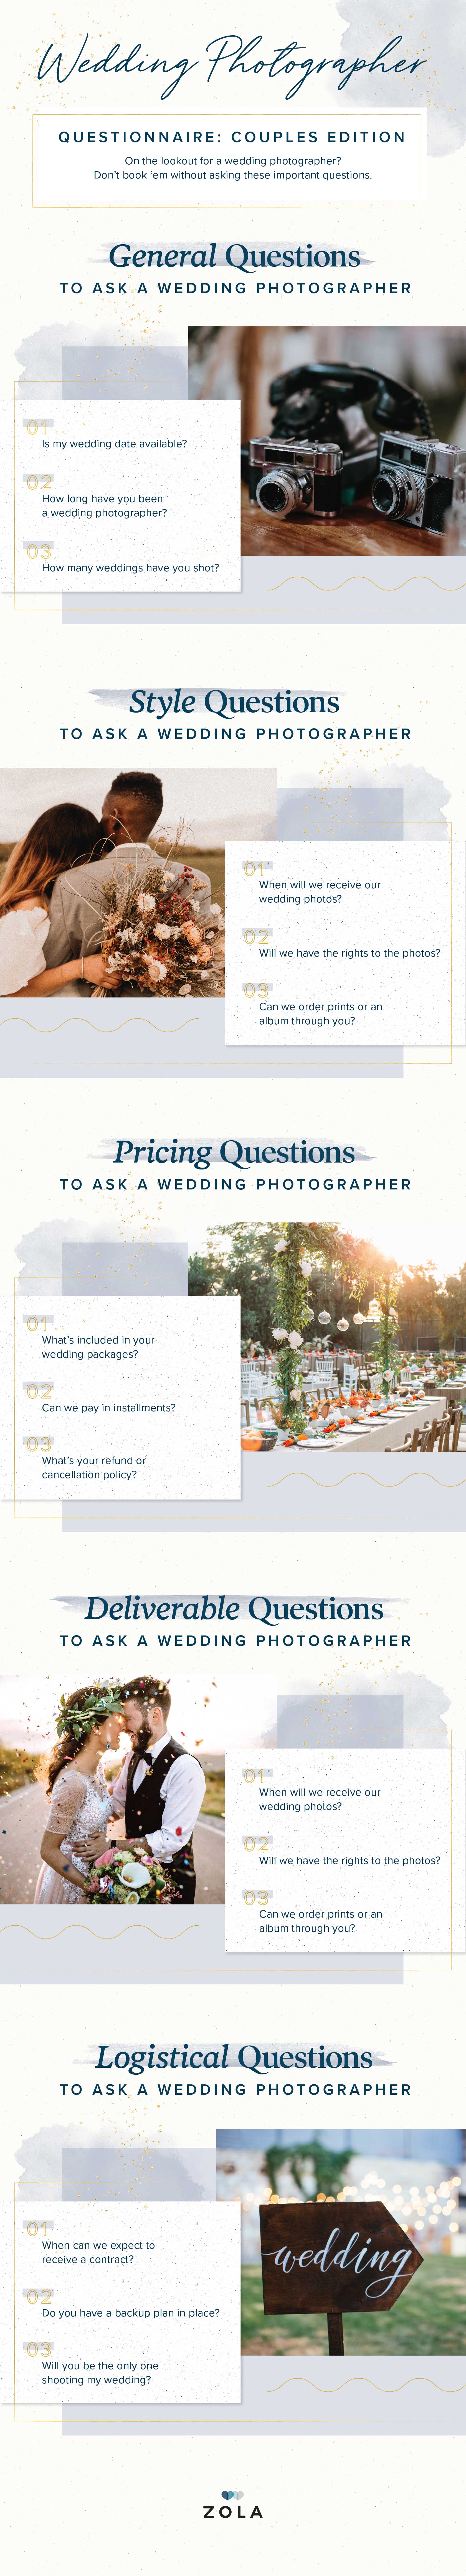 questions-to-ask-wedding-photographer-ig